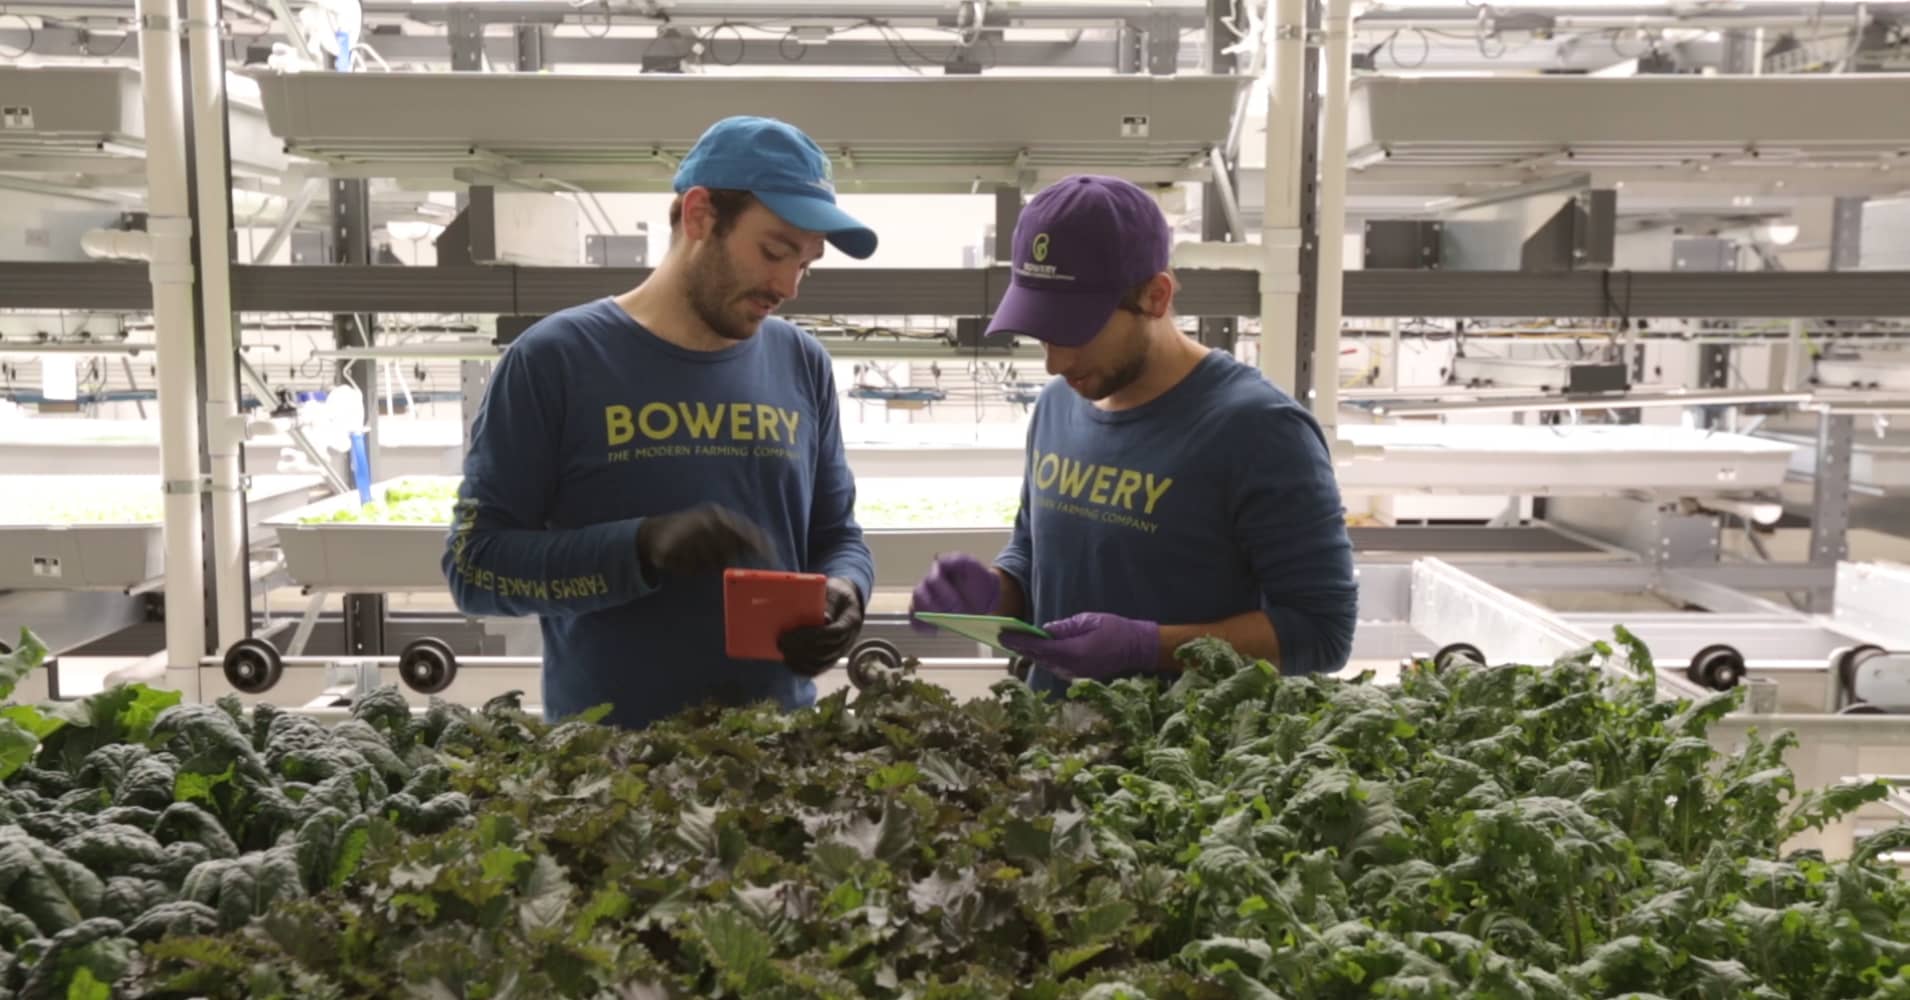 Bowery Farming is growing crops in warehouses to create food like customized kale